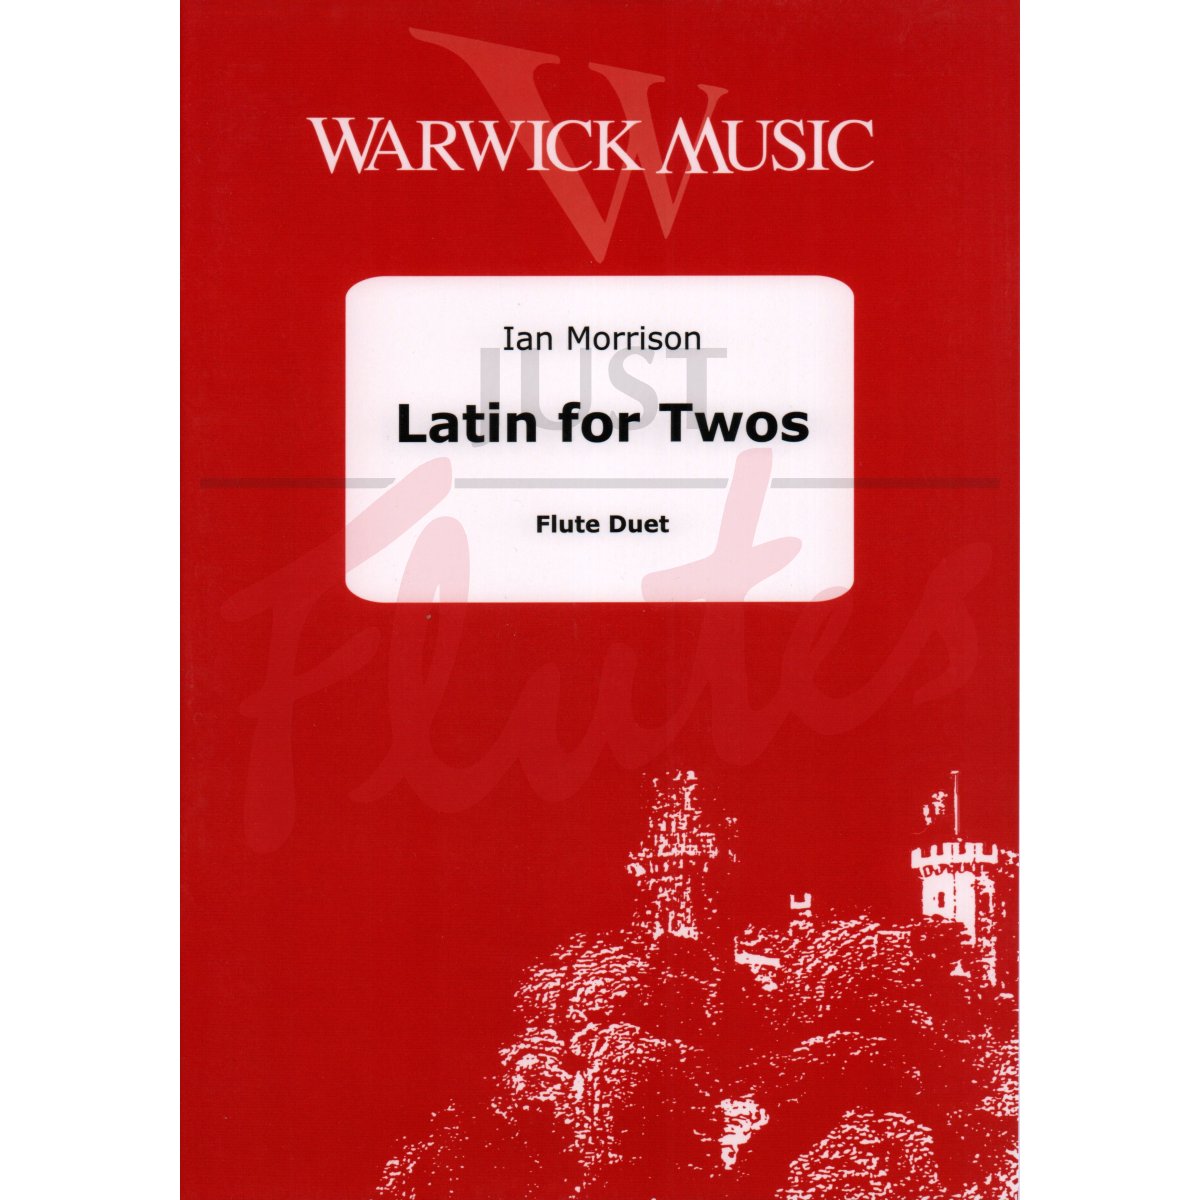 Latin for Twos for Flute Duet